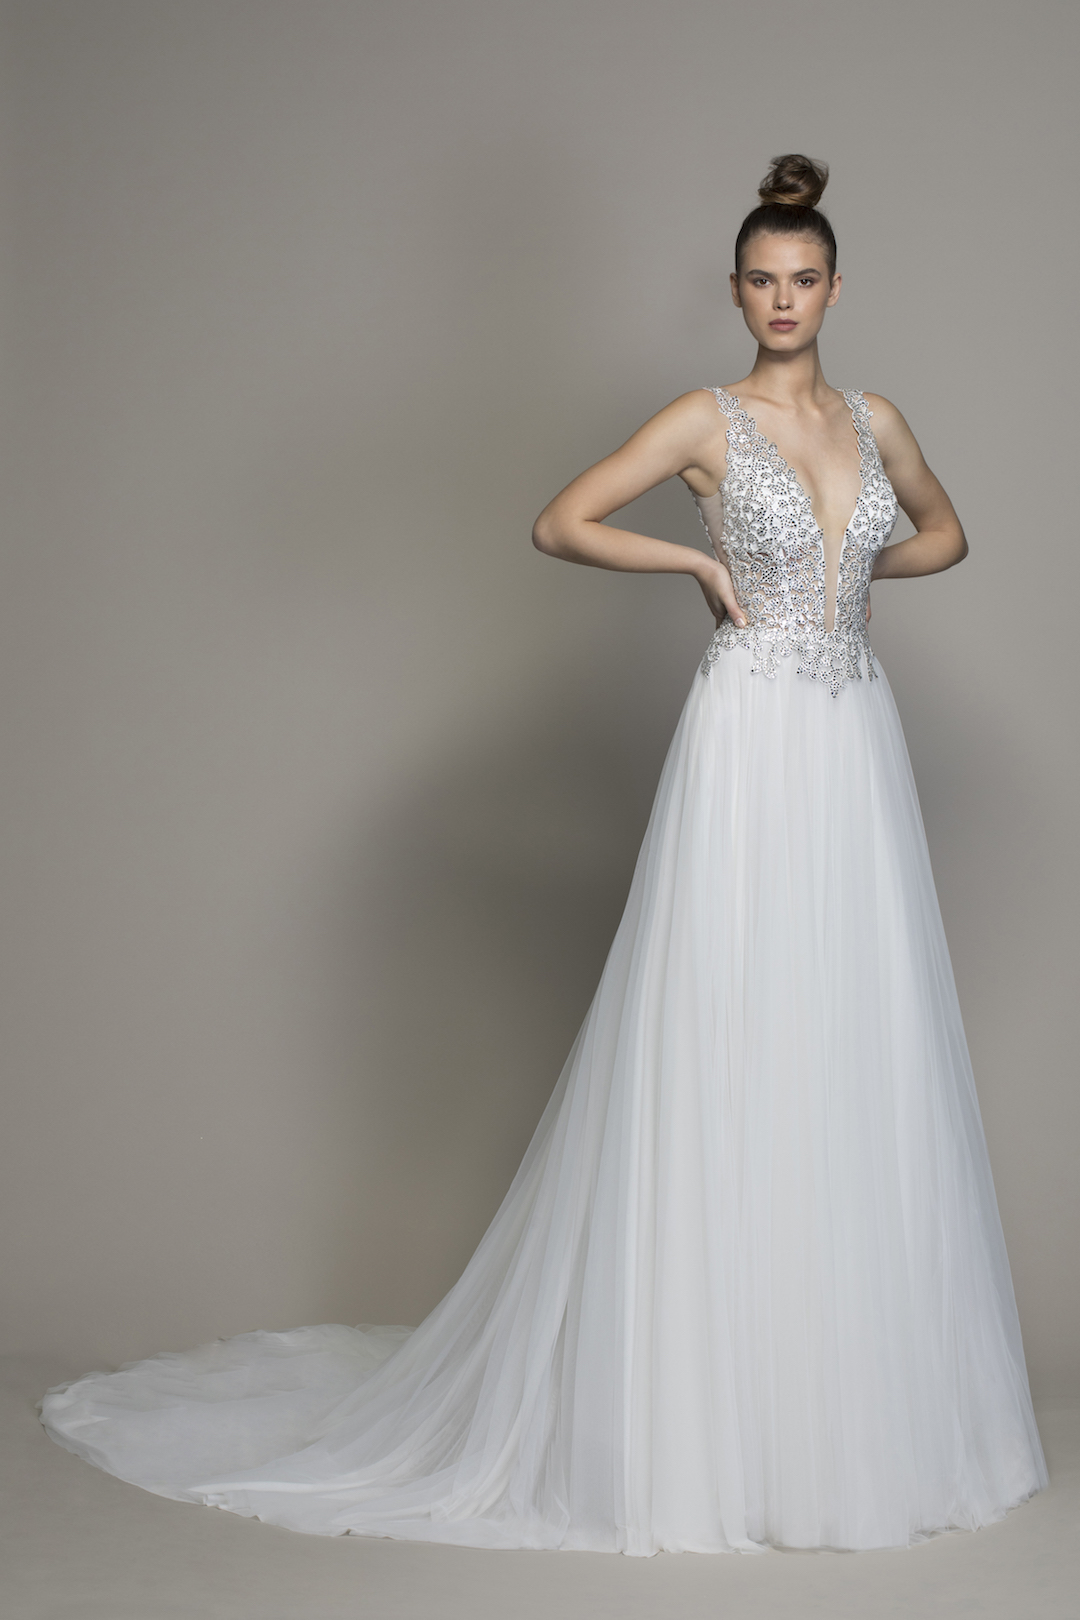 Introducing The LOVE by Pnina Tornai 2020  Collection  